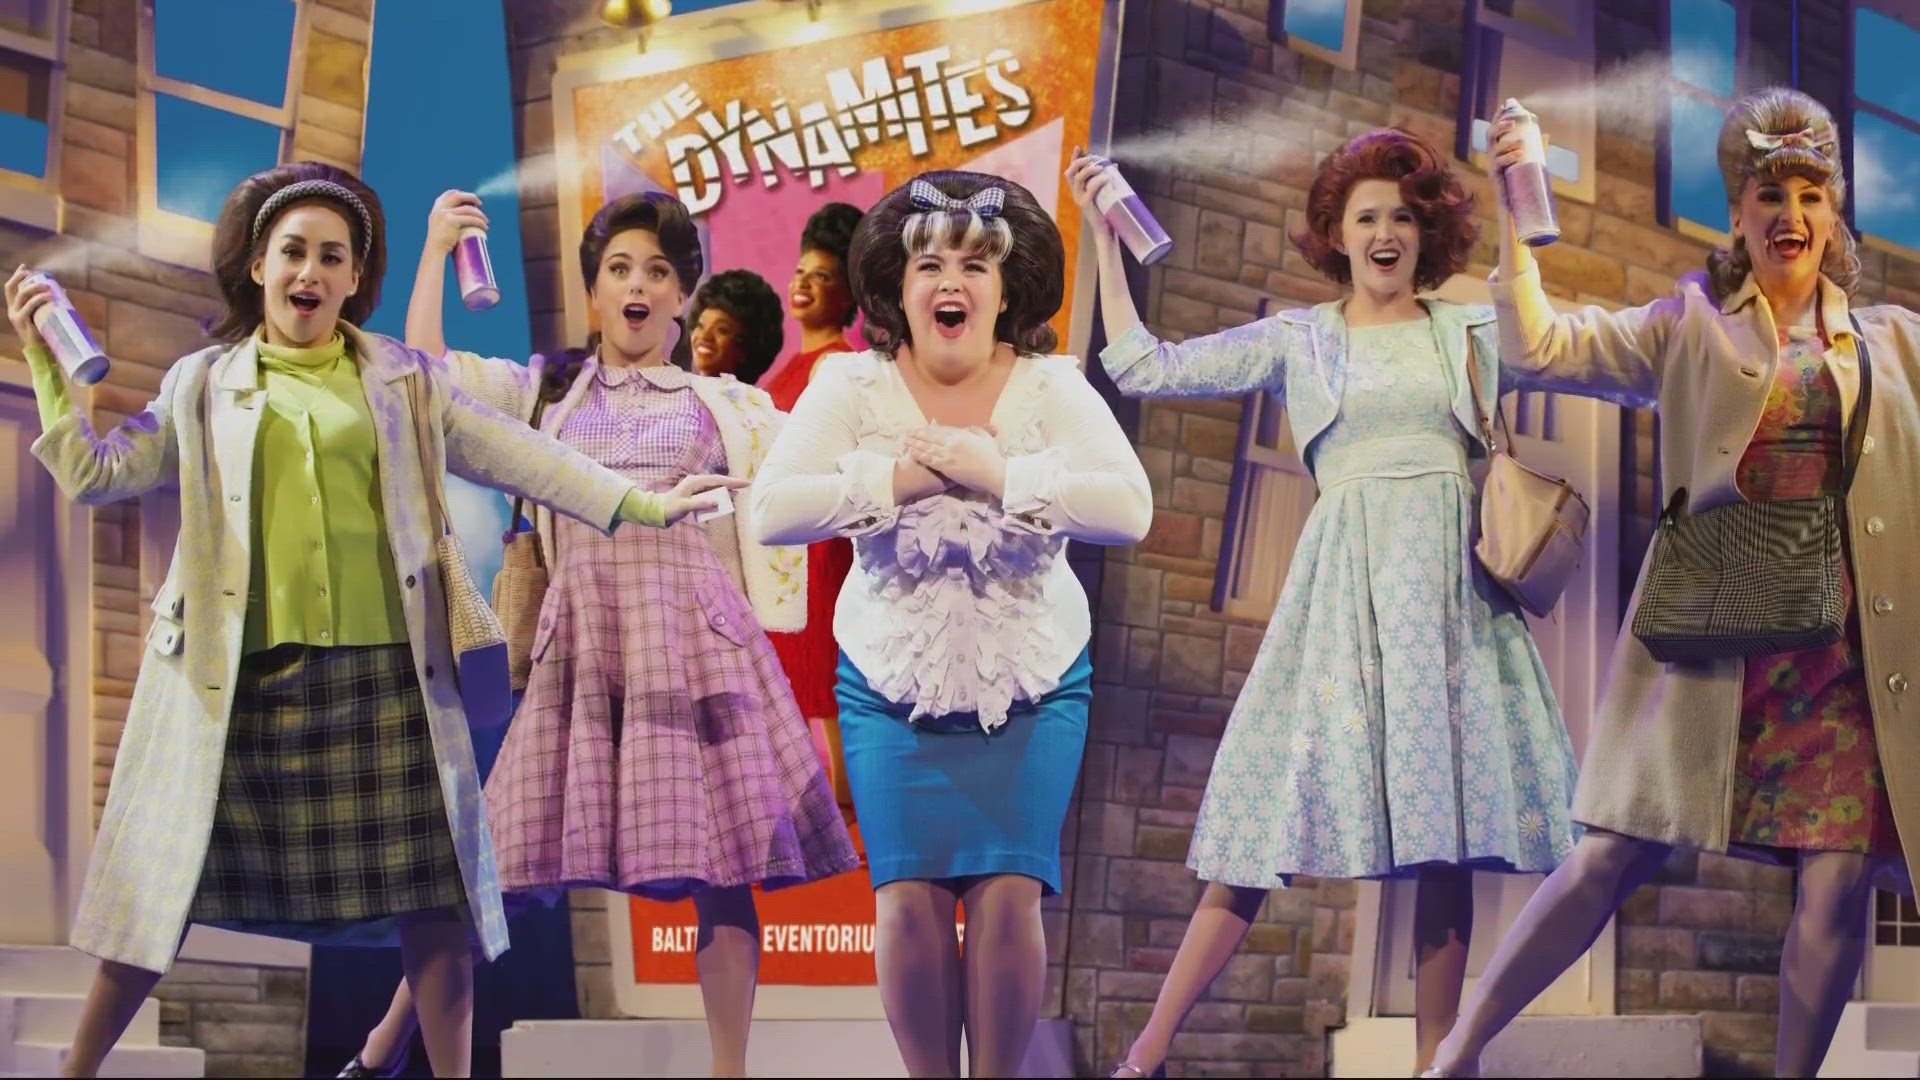 'Hairspray' plays at Keller Auditorium through April 2. Devon Haskins spoke with the cast and explains how the play pays tribute to a Portland icon.